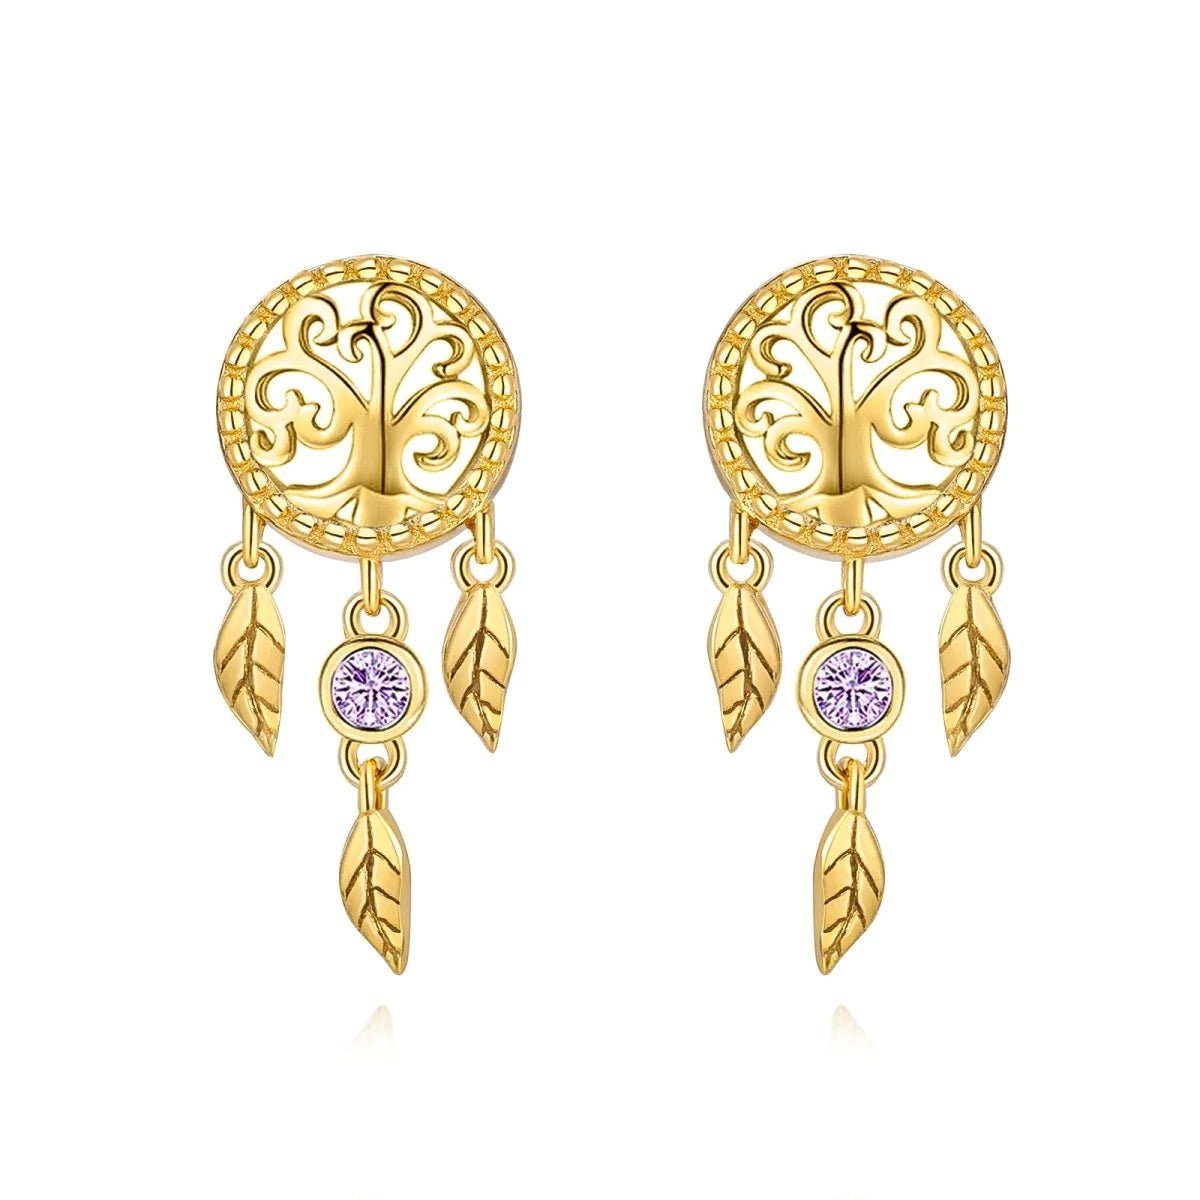 "Catches Dreams" Earrings - Milas Jewels Shop